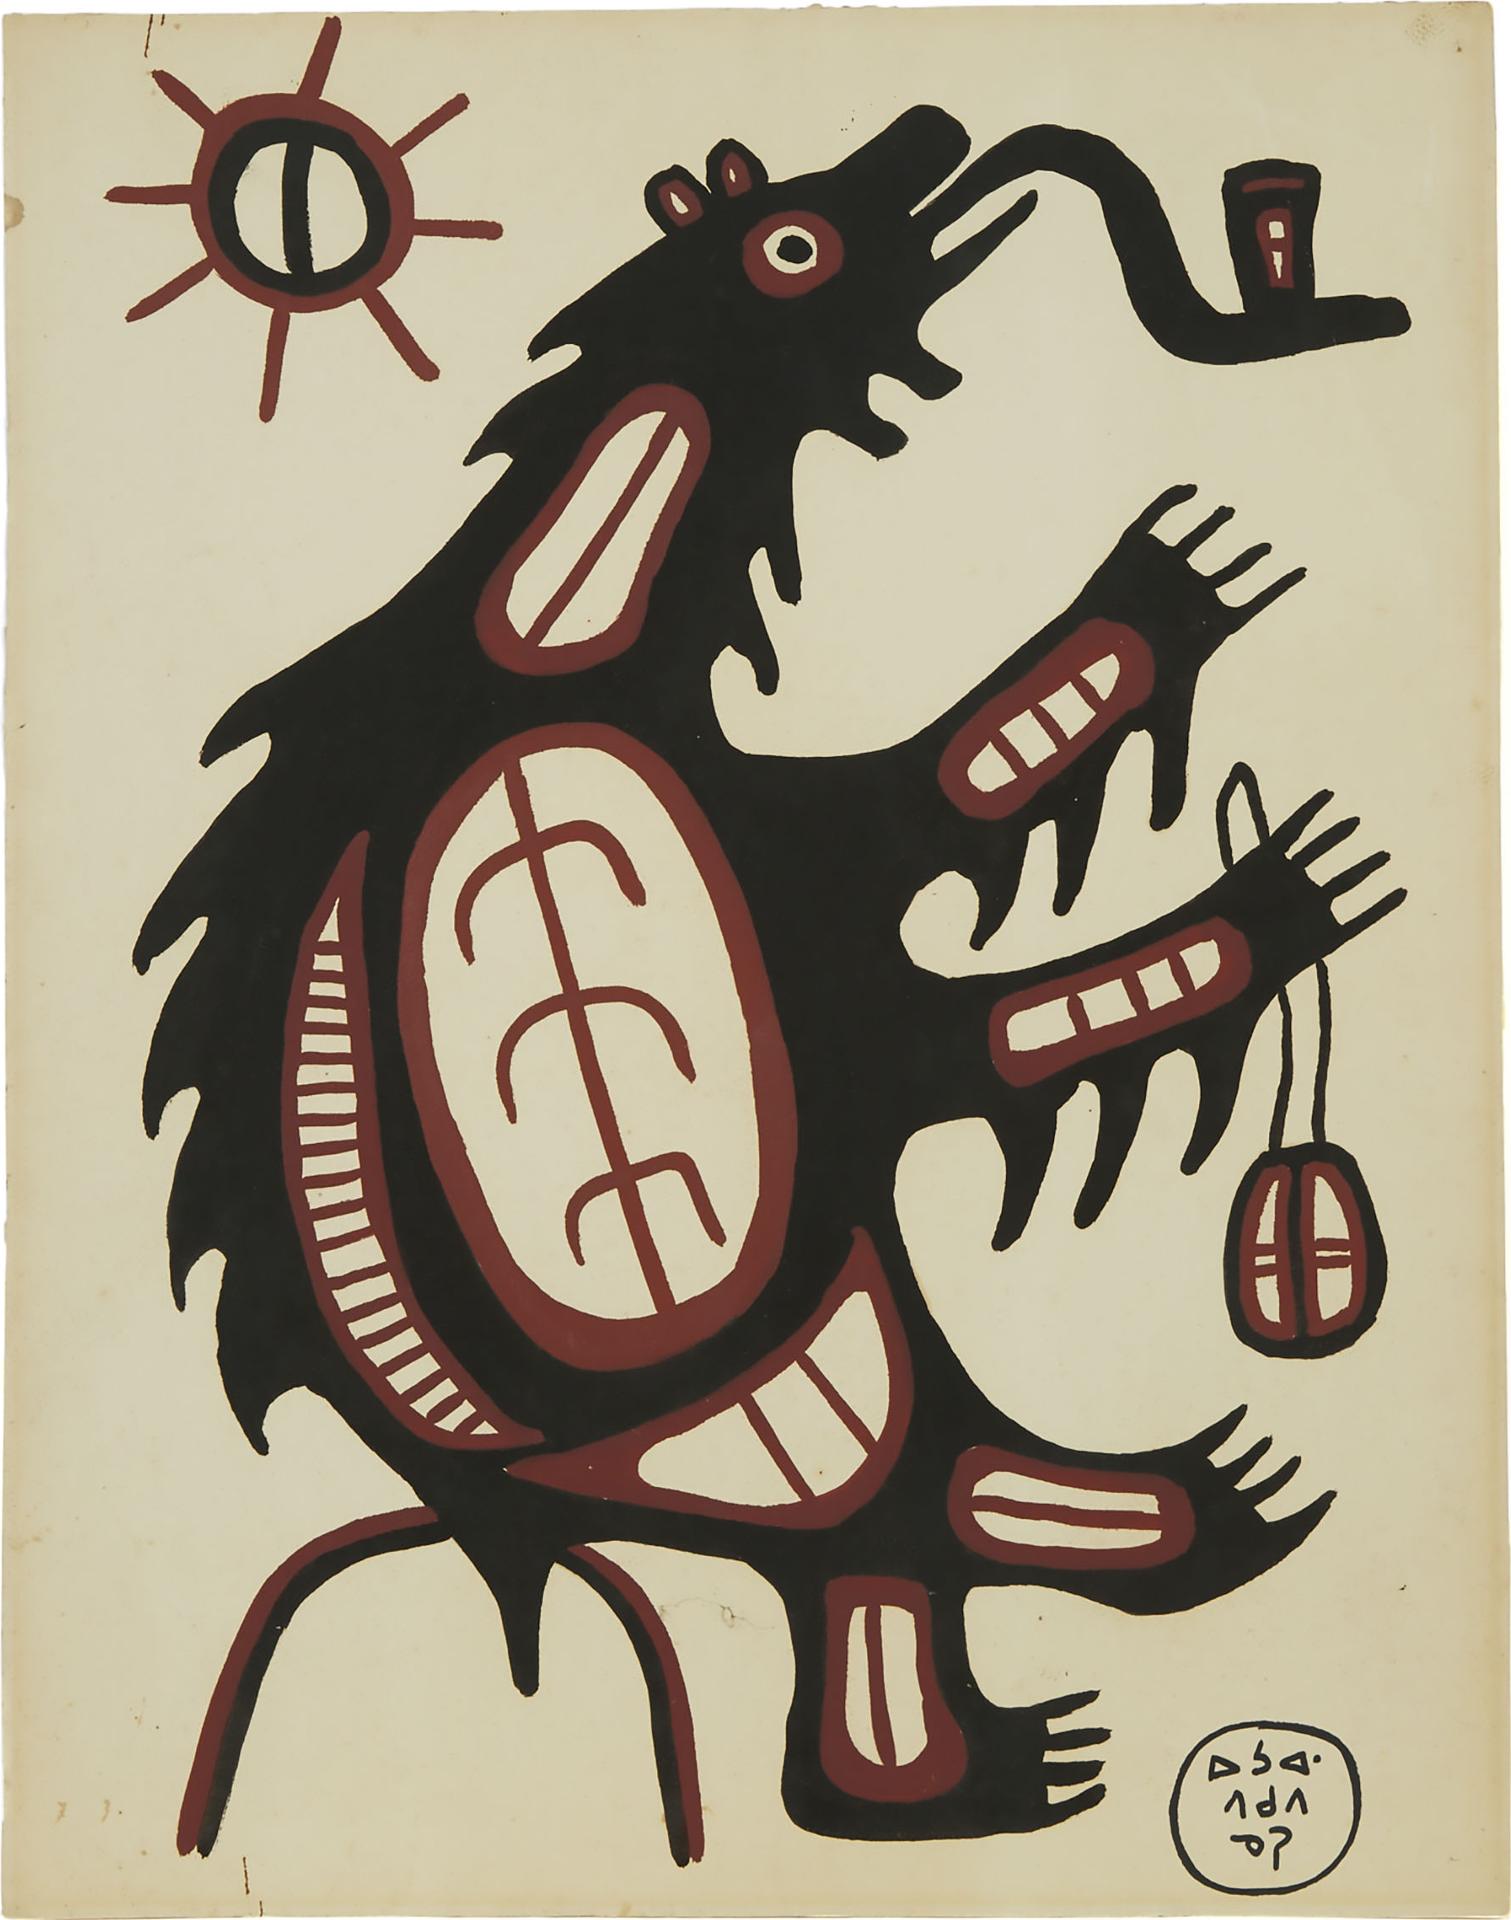 Norval H. Morrisseau (1931-2007) - Bear Smoking A Pipe